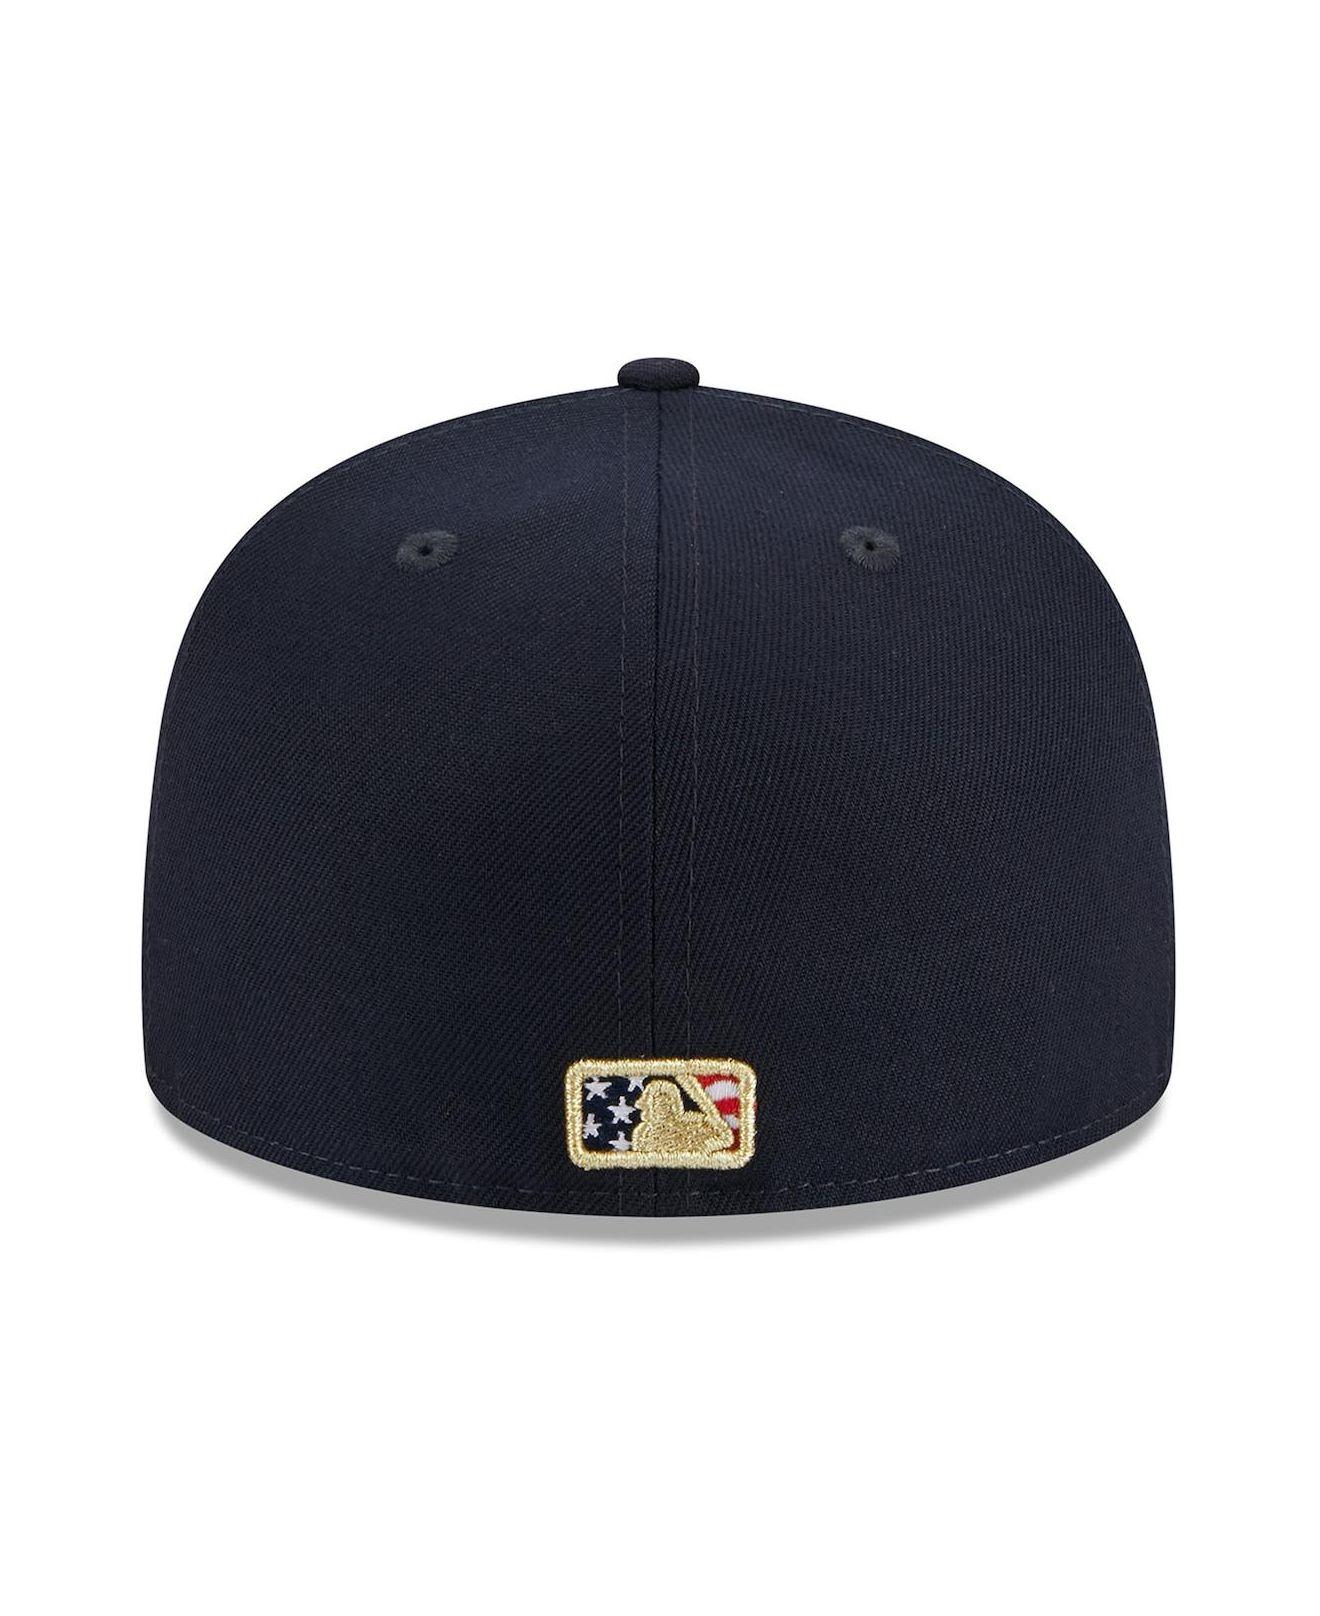 Lids Kansas City Royals New Era 59FIFTY Fitted Hat - Black/Gold